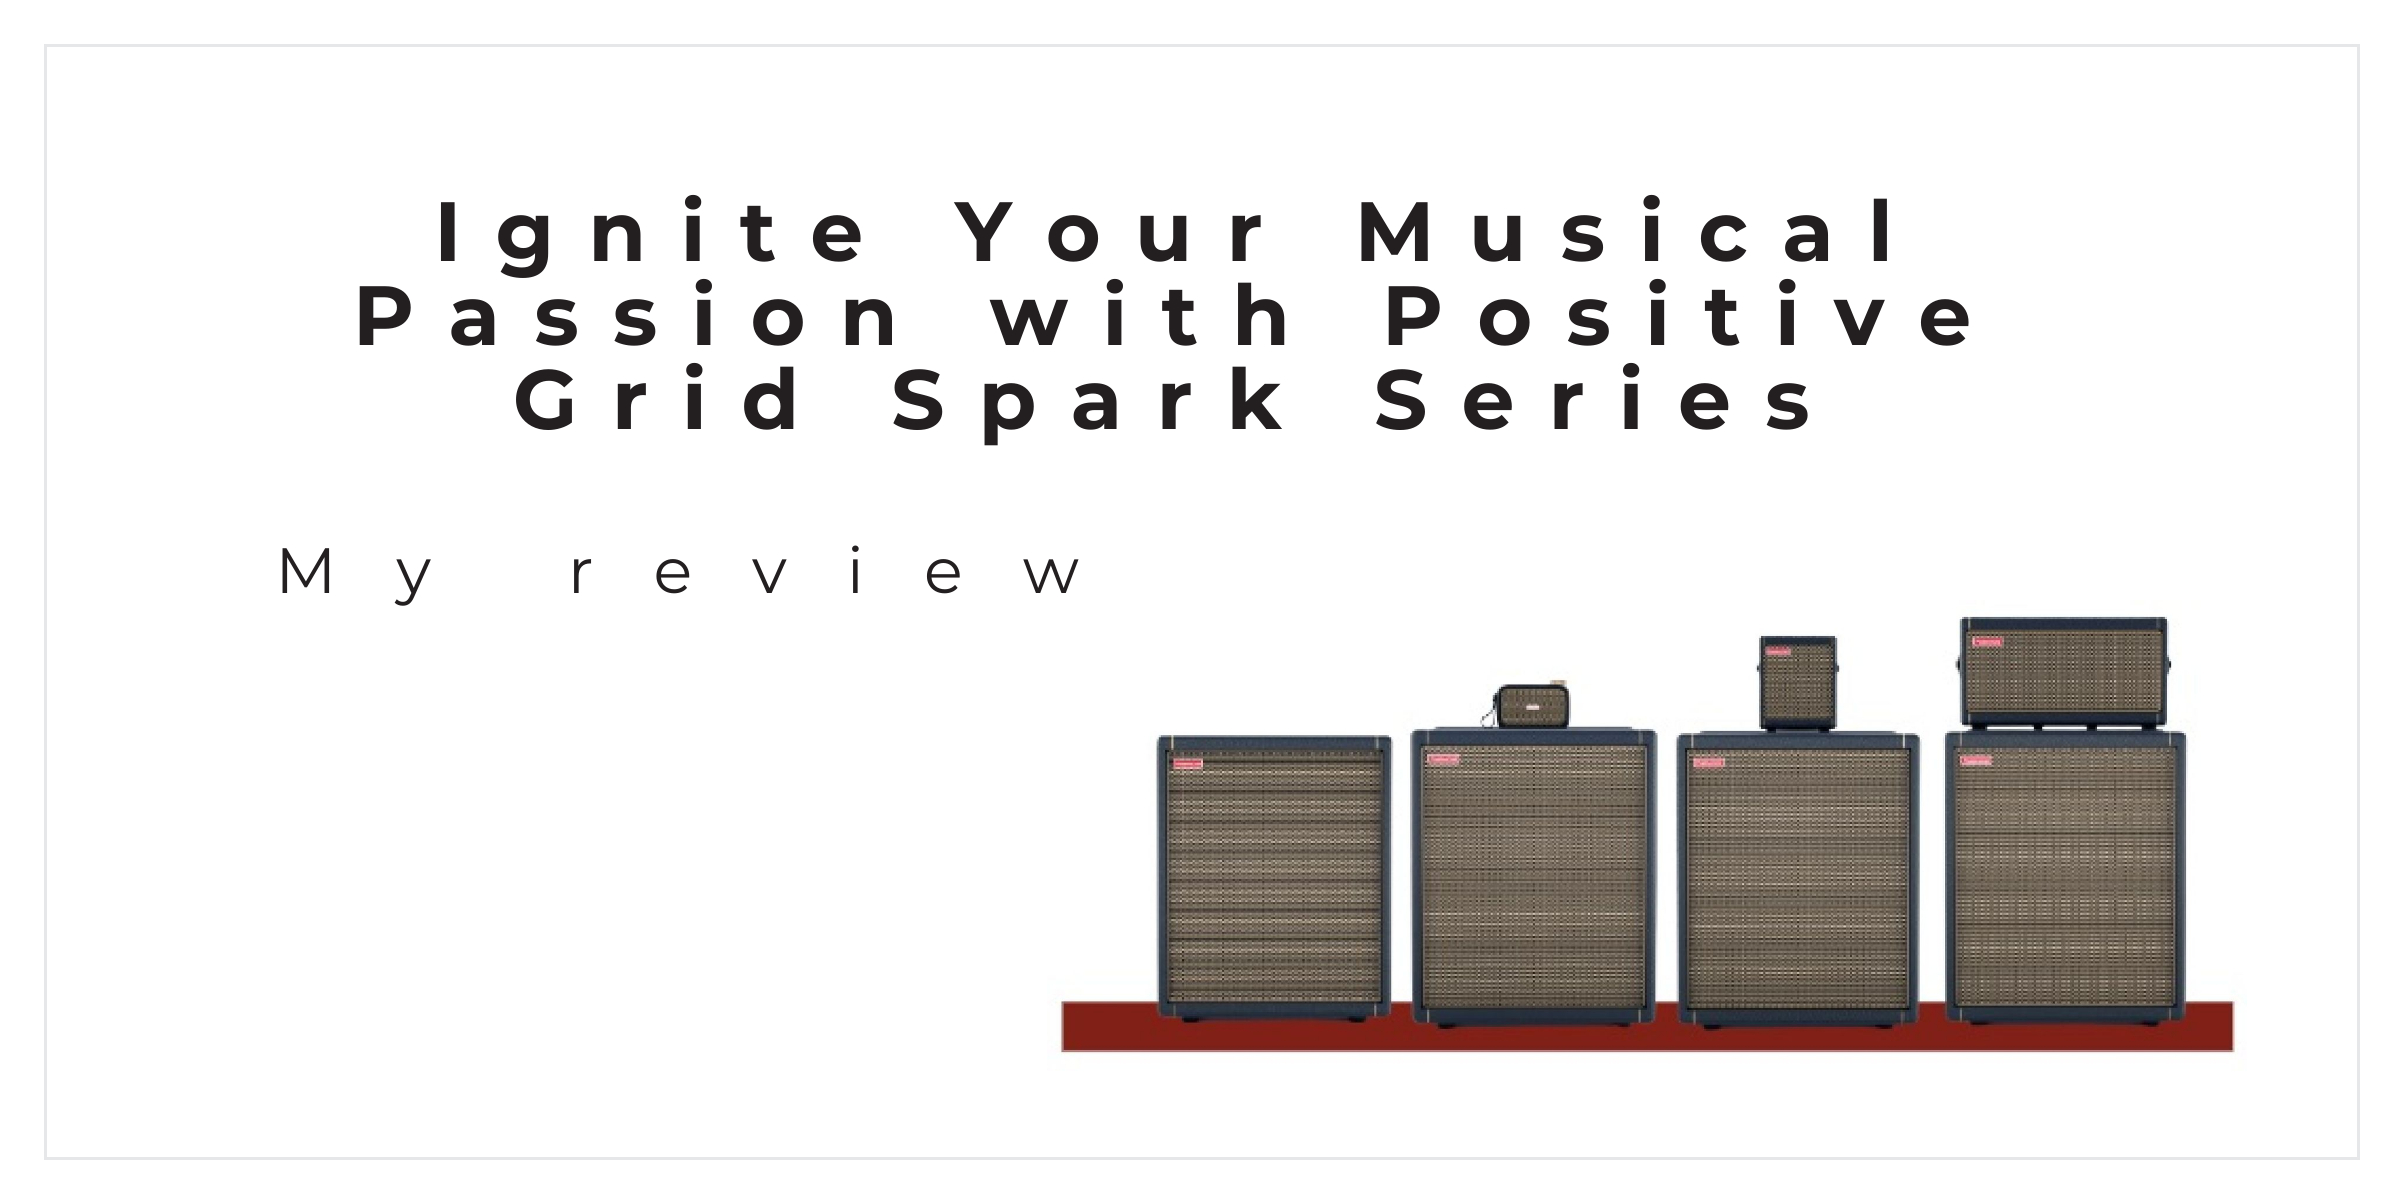 Ignite Your Musical Passion with Positive Grid Spark